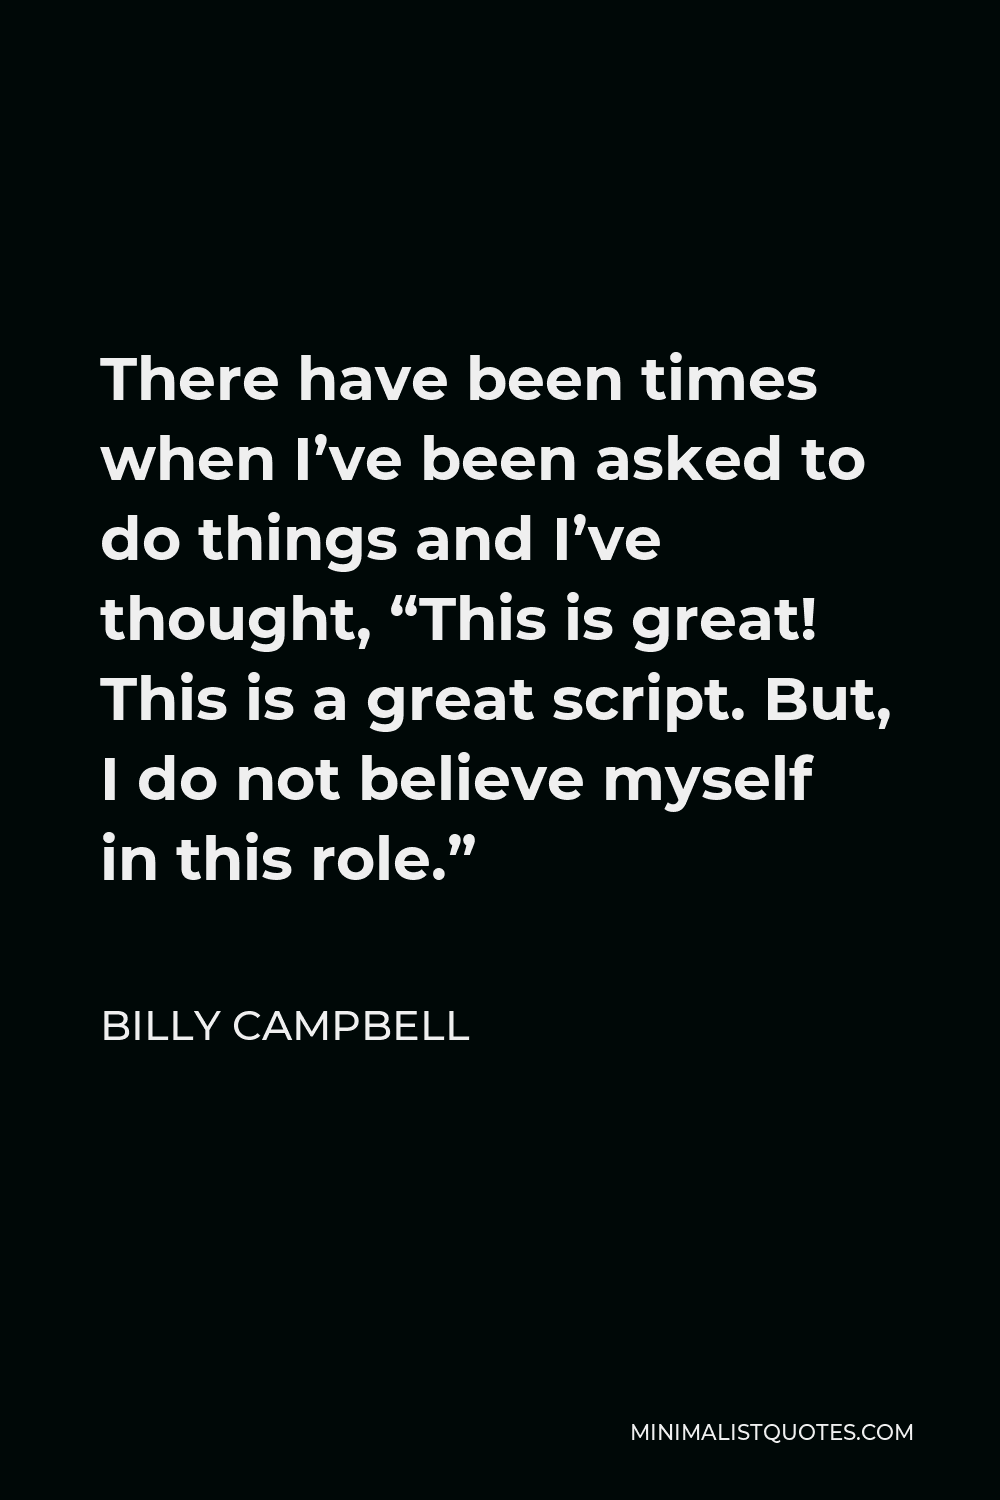 Billy Campbell Quote - There have been times when I’ve been asked to do things and I’ve thought, “This is great! This is a great script. But, I do not believe myself in this role.”